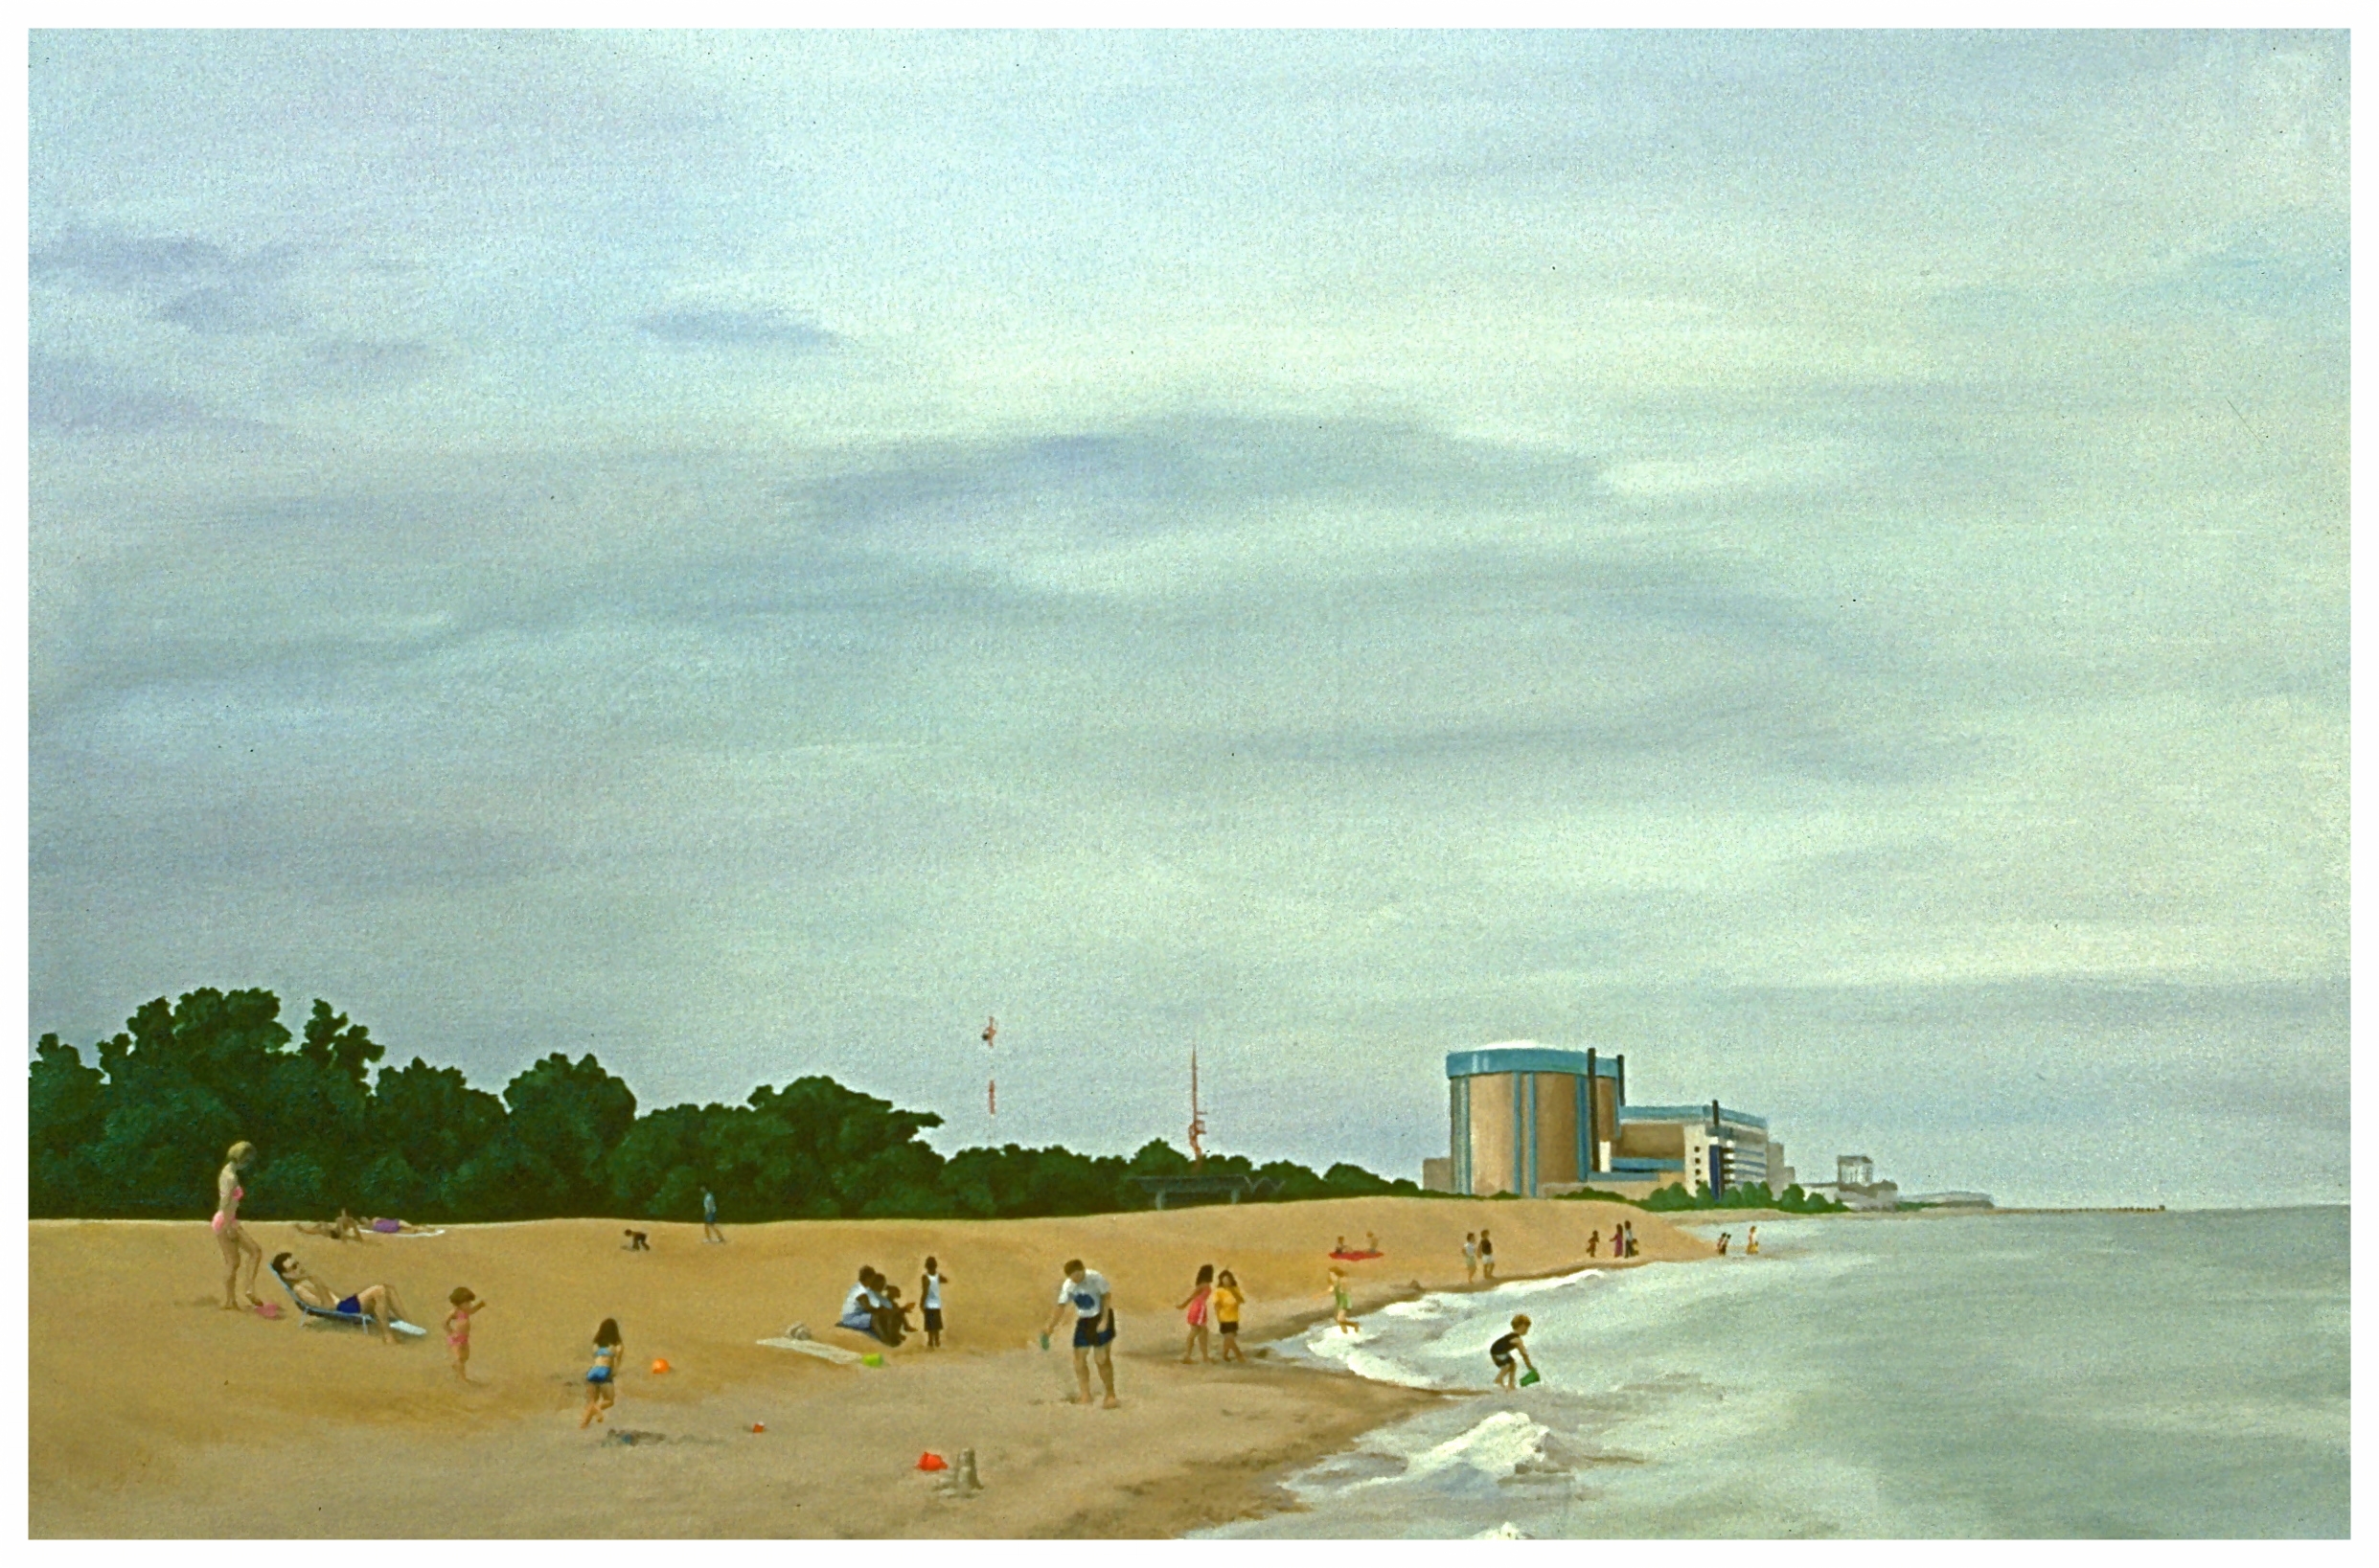 Zion Nuclear Plant/Illinois State Beach Park, 24x36 (sold)